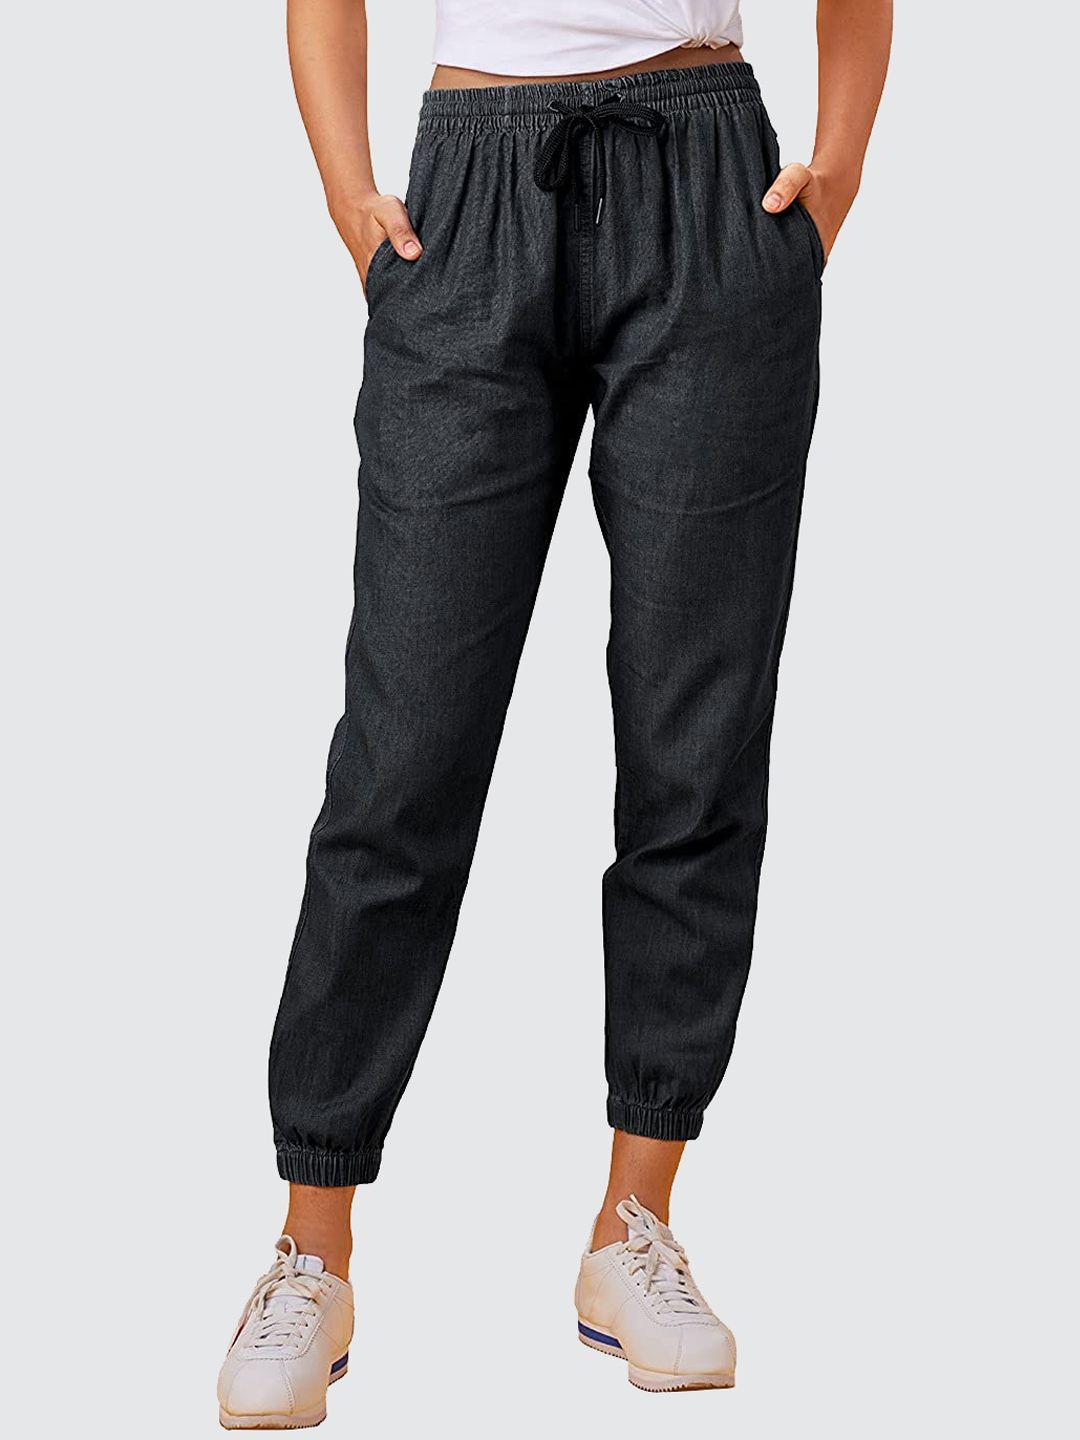 the souled store women grey solid track pants